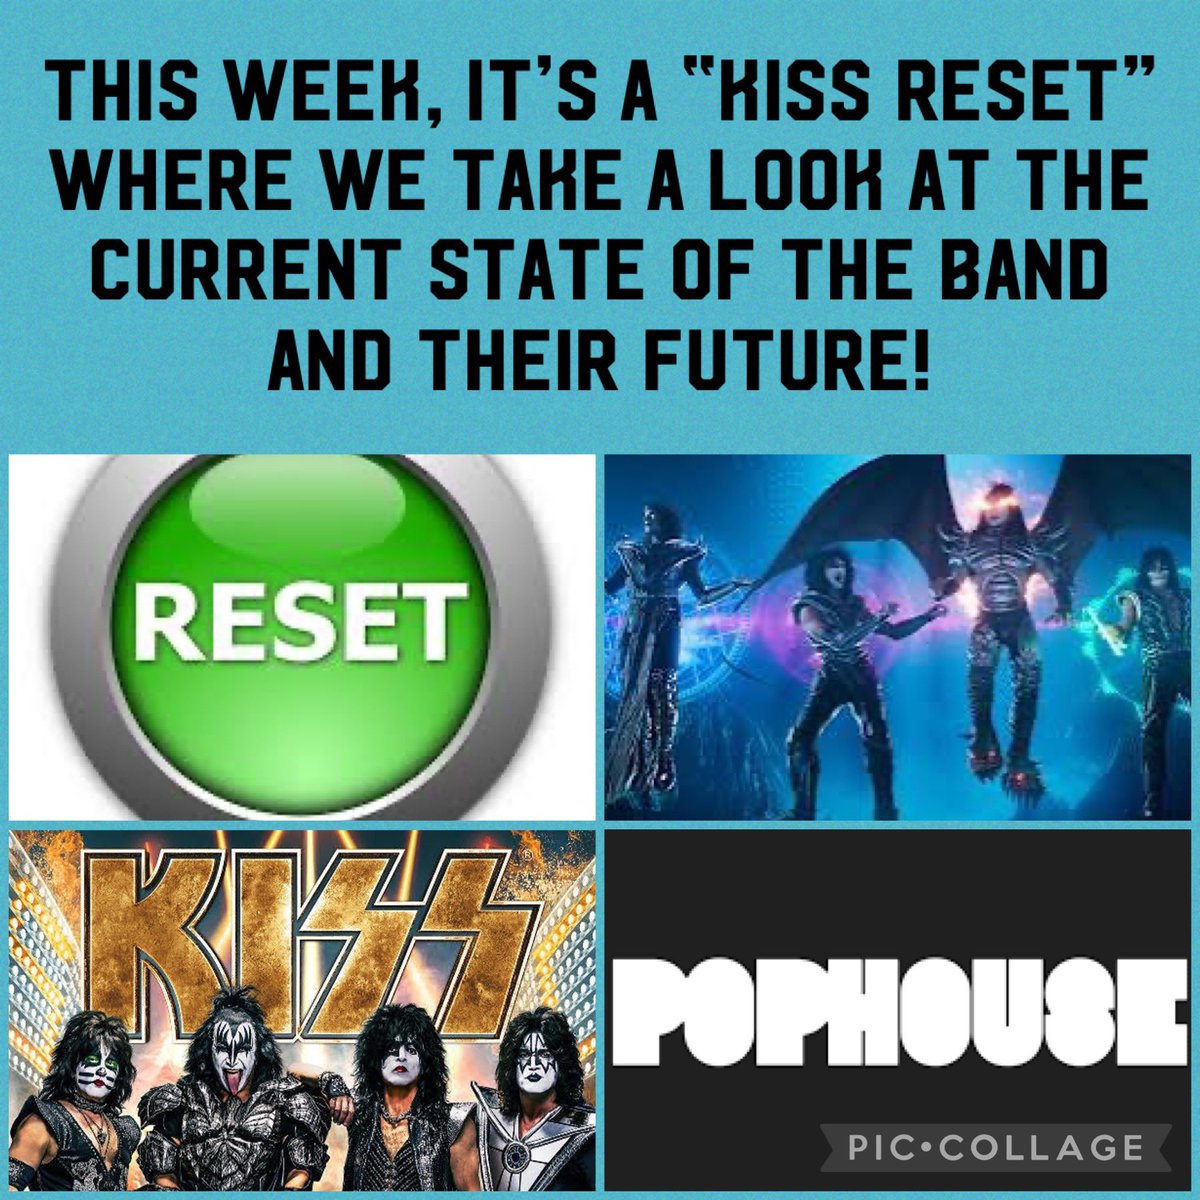 🚨NEW EPISODE! This week we have a deep dive discussion into the current state of @kiss and the future of the band and members. We call it a “KISS reset” and we give our thoughts, opinions and predictions as always! CHECK US OUT!👇🏻 shoutitoutloudcast.com/shout-it-out-l…